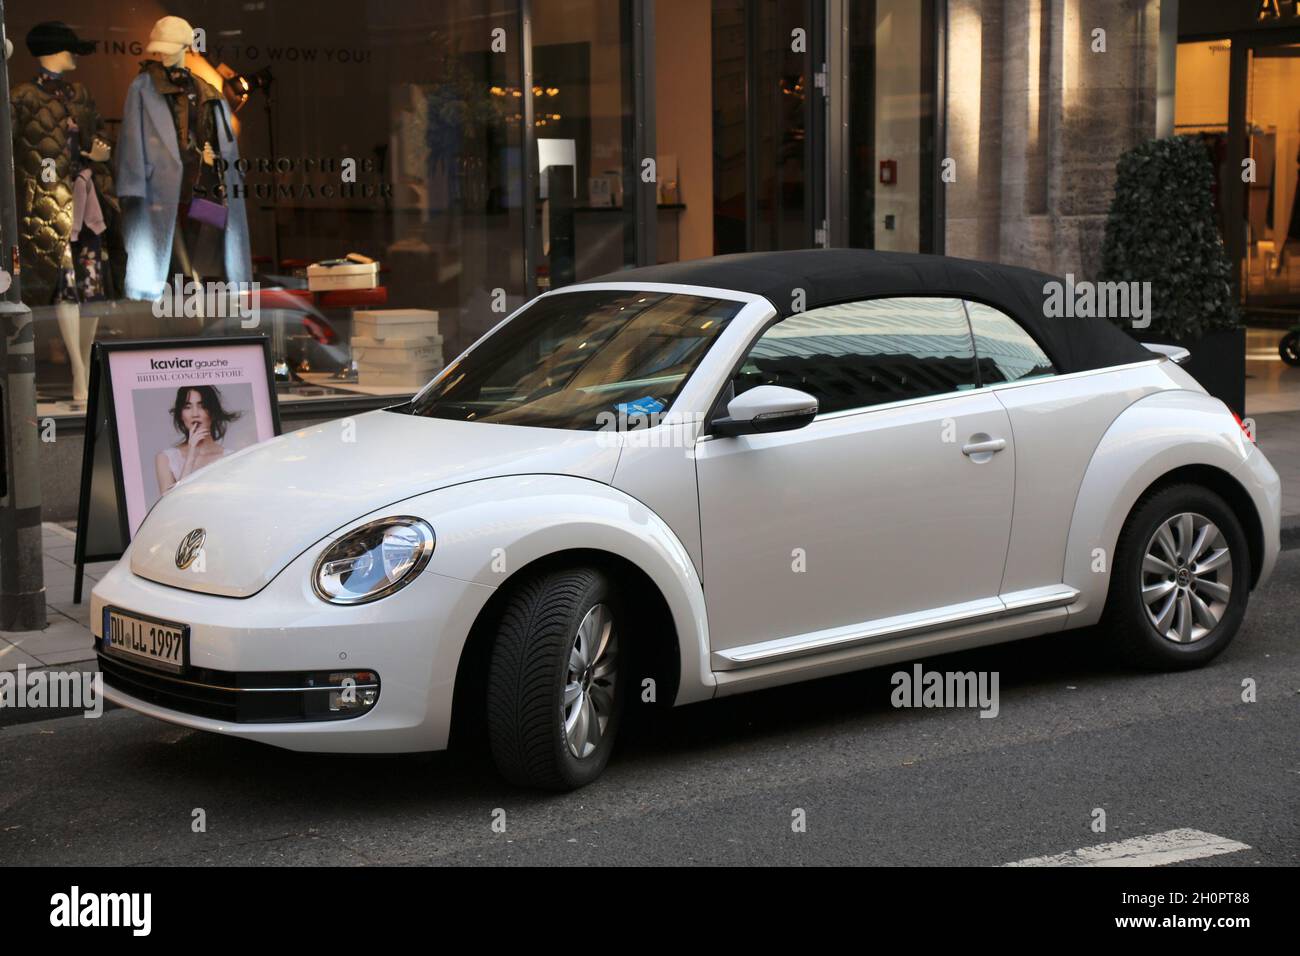 DUSSELDORF, GERMANY - SEPTEMBER 19, 2020: VW New Beetle small convertible car parked in Germany. There were 45.8 million cars registered in Germany (a Stock Photo